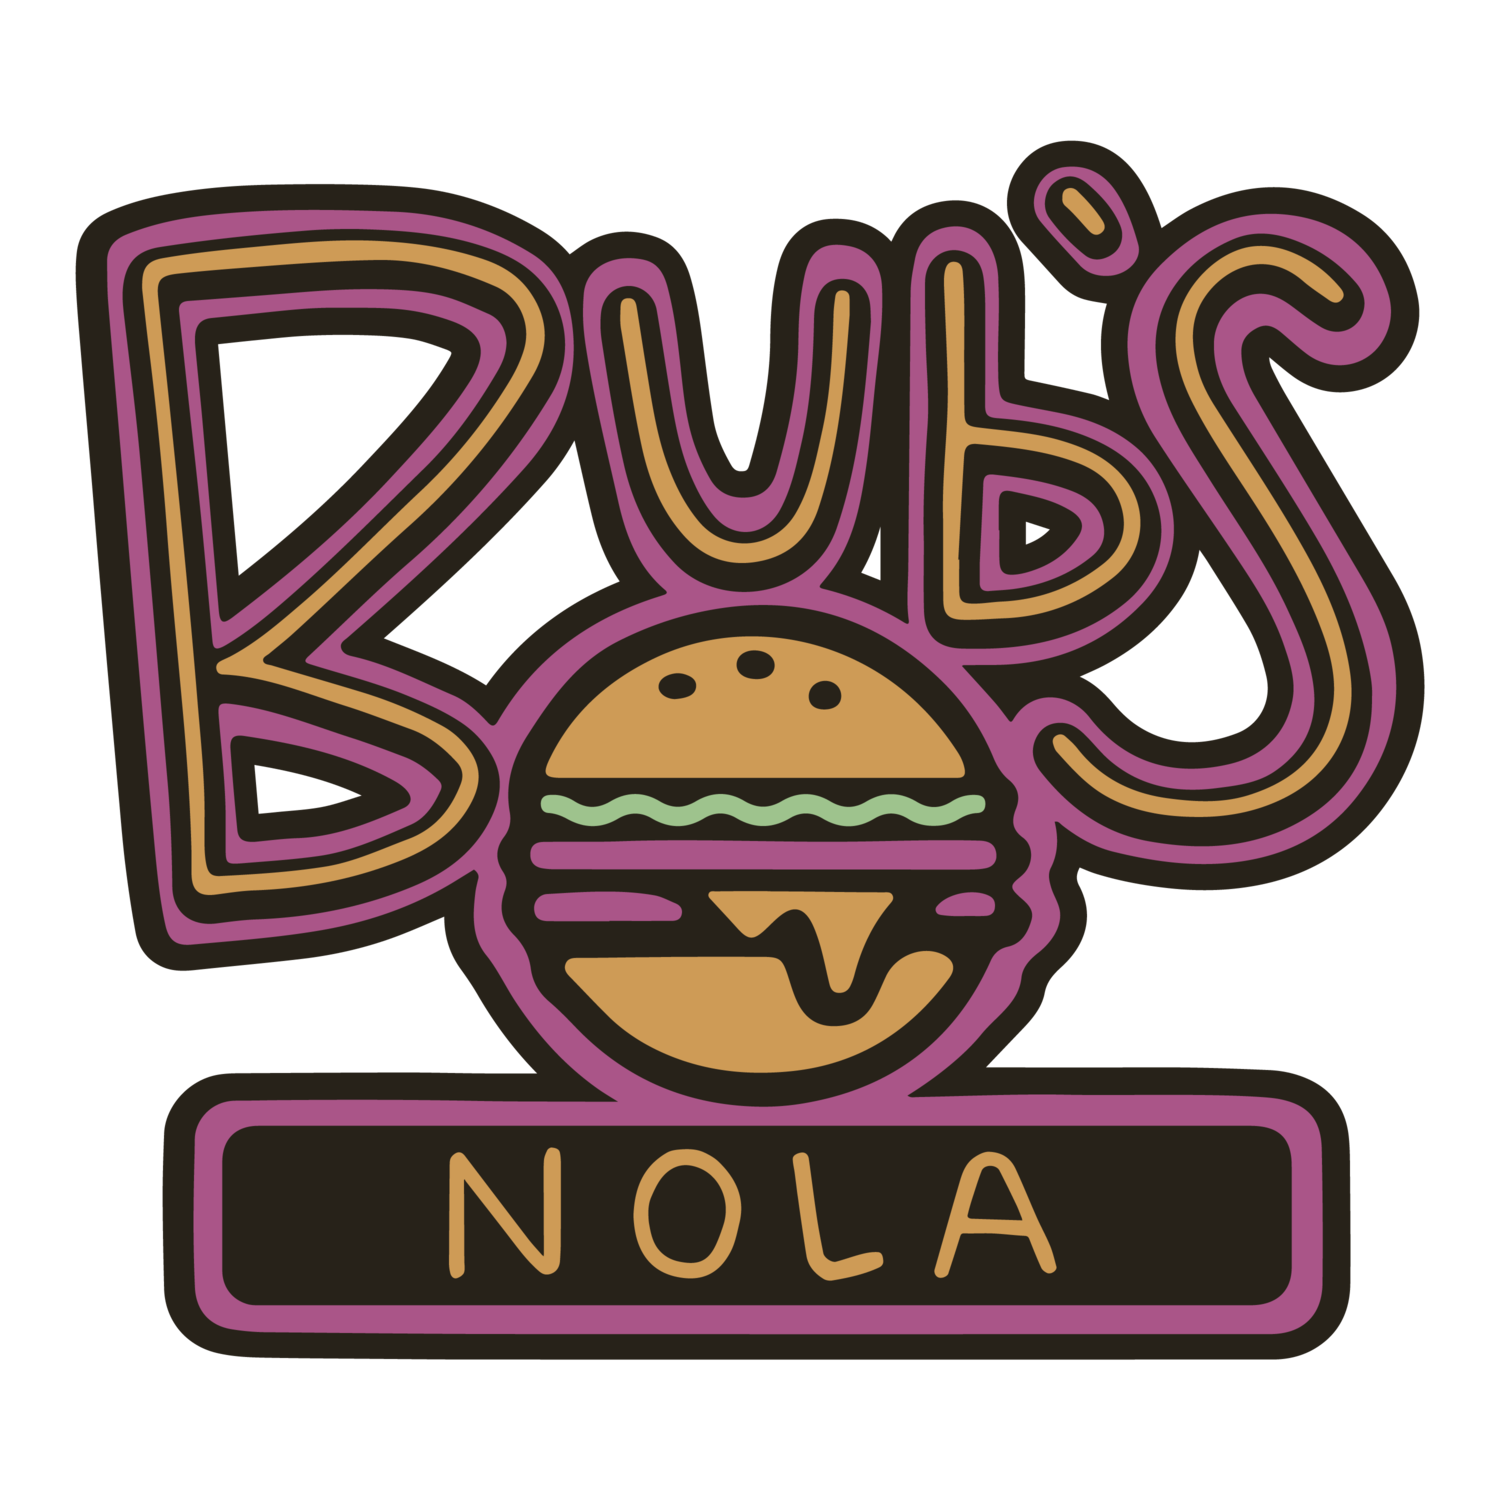 bubs burgers uses our waitlist